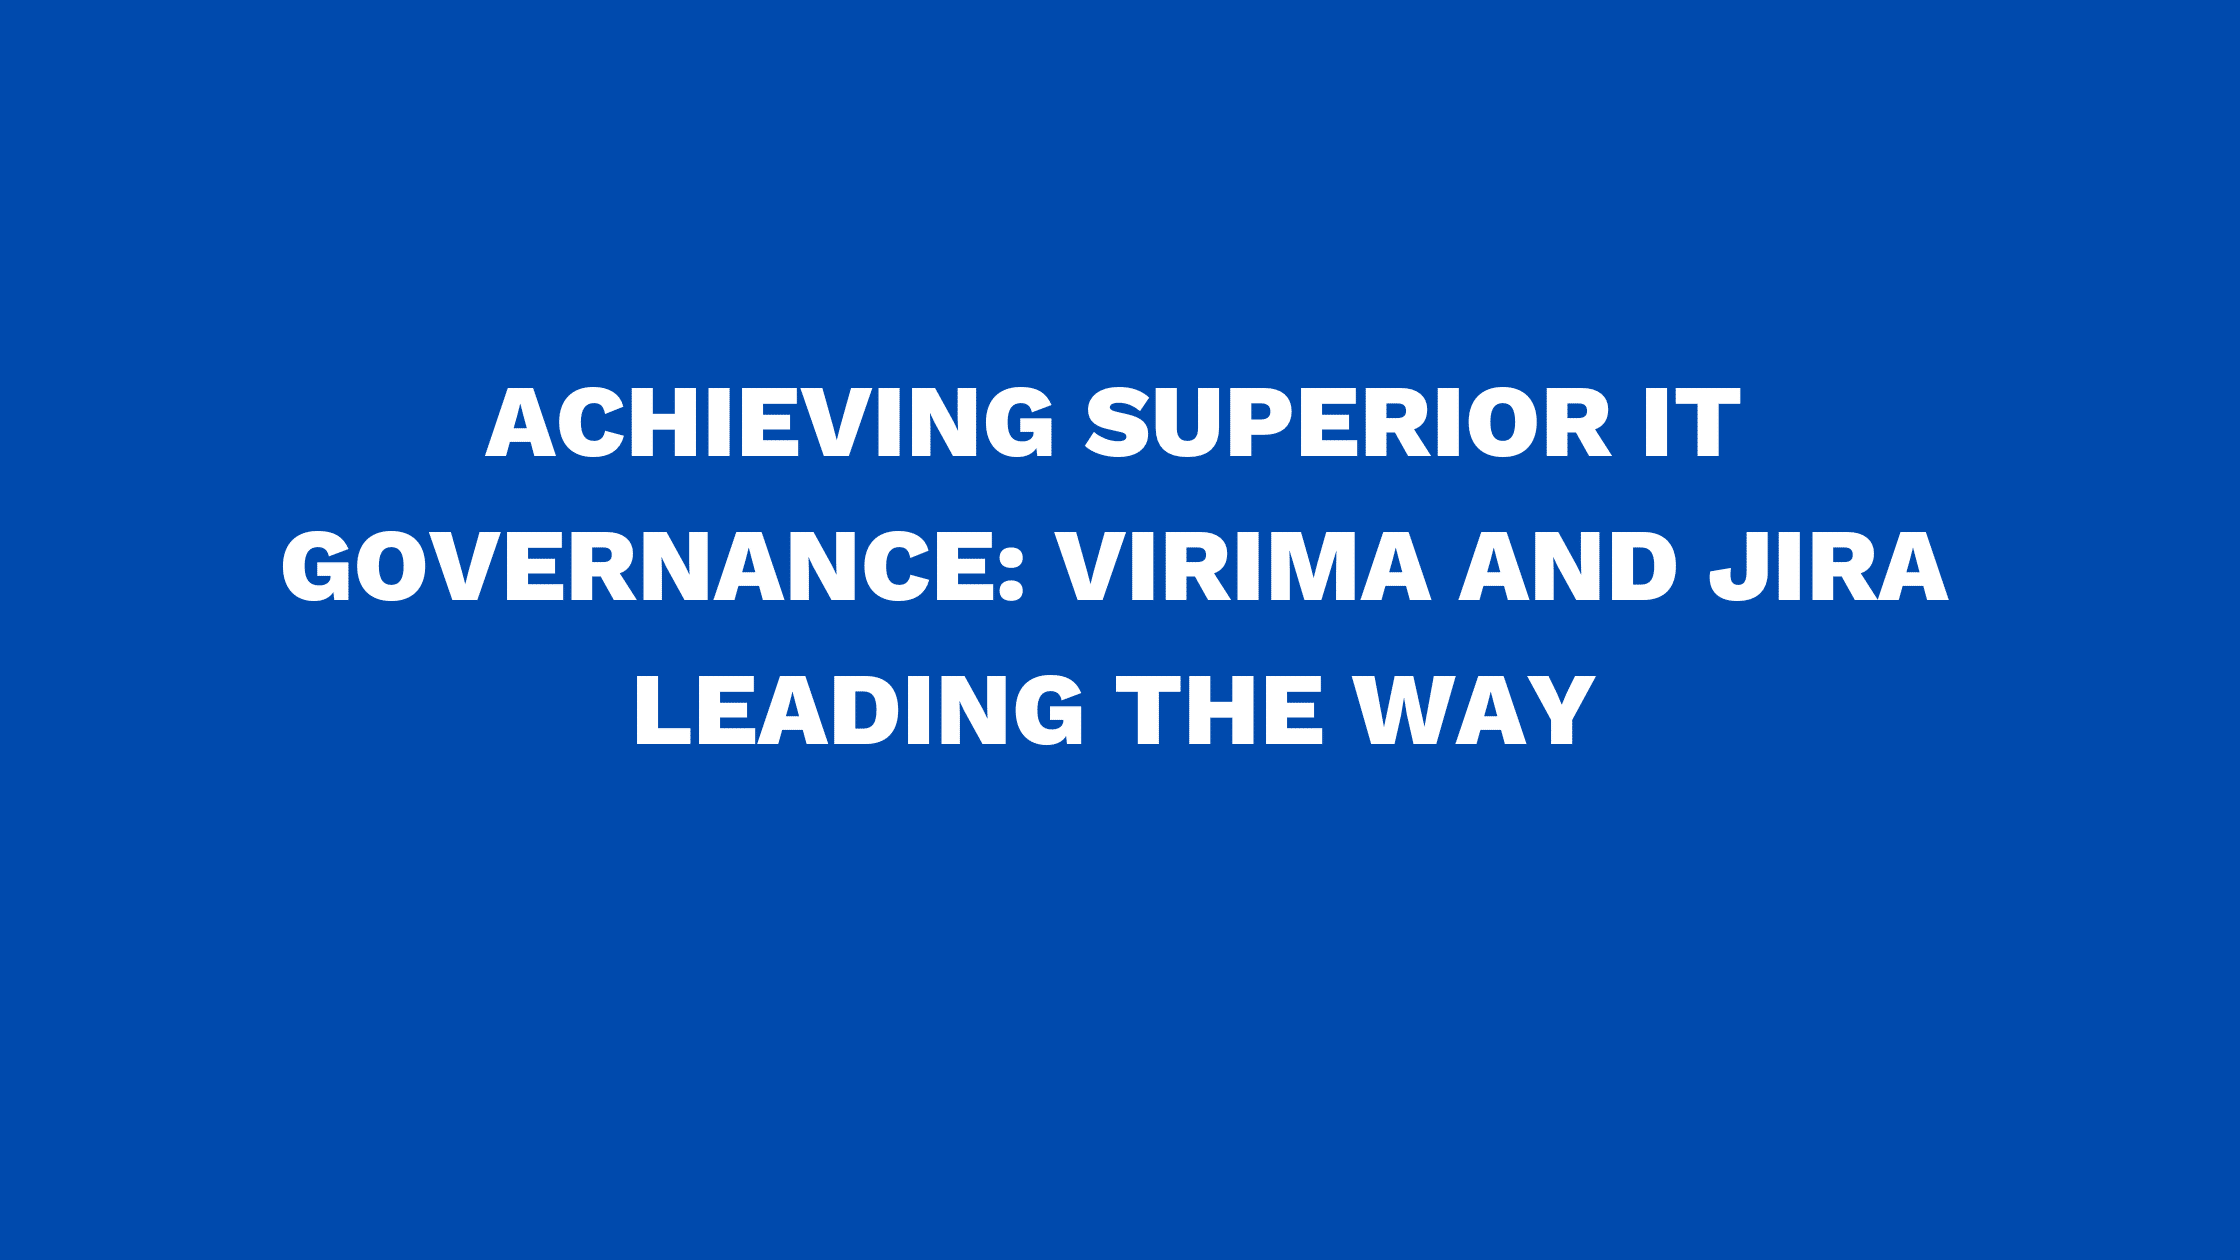 Achieving Superior IT Governance: Virima and Jira Leading the Way